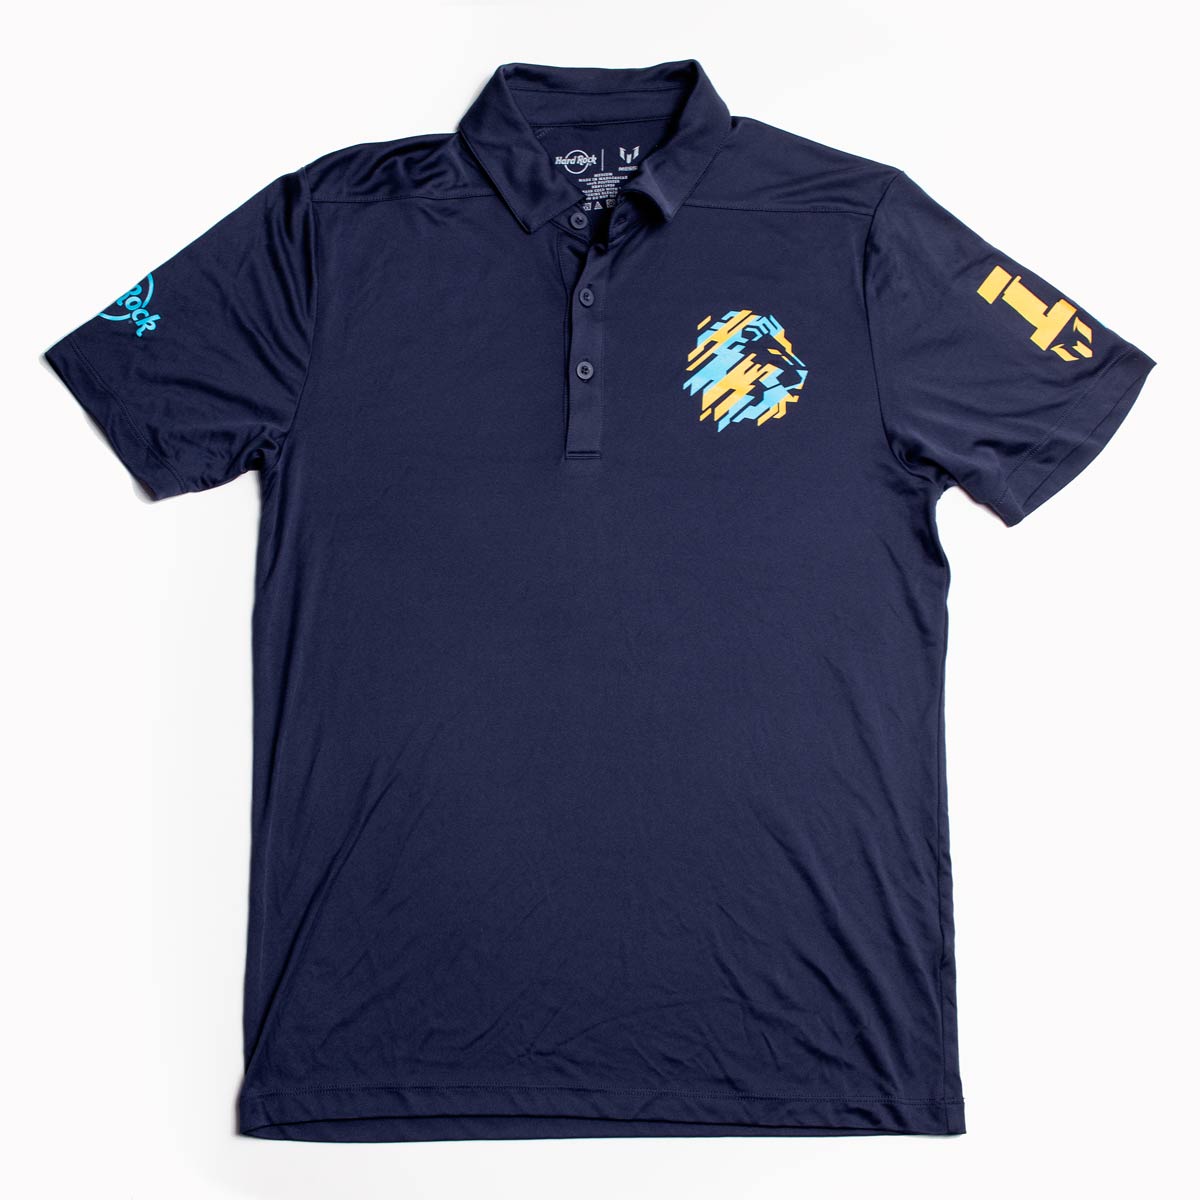 Messi Performance Polo Tee in Navy image number 1